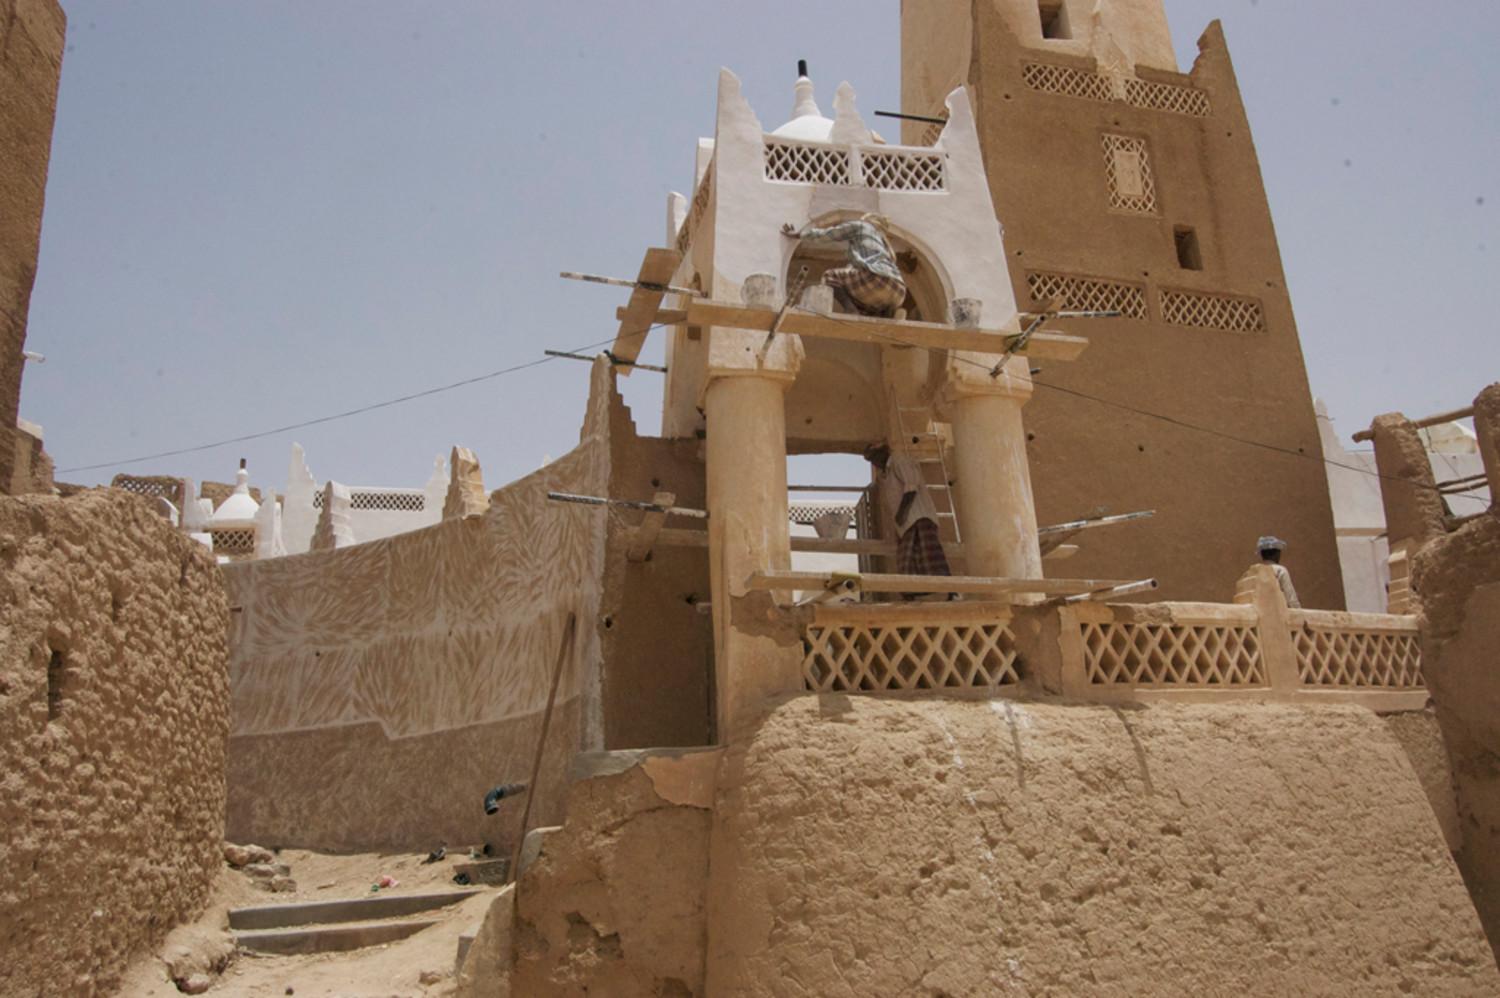 Eastern entrance and minaret base to the right, showing the extension of the south wall also being re-plastered in several coatings of mud followed by nurah